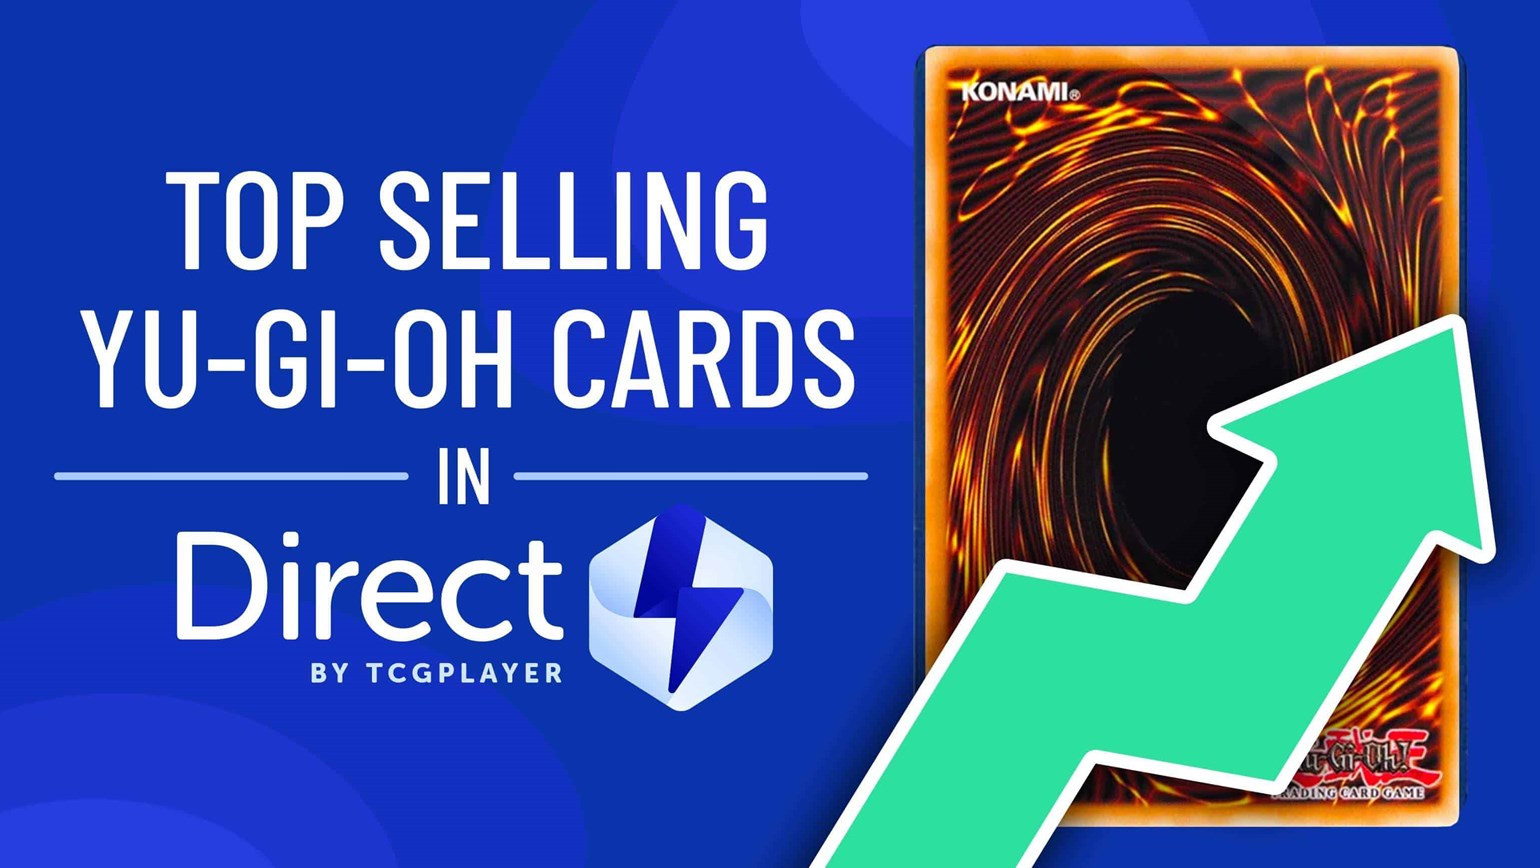 December Top Selling Yu-Gi-Oh! Cards Under $25 in Direct by TCGplayer